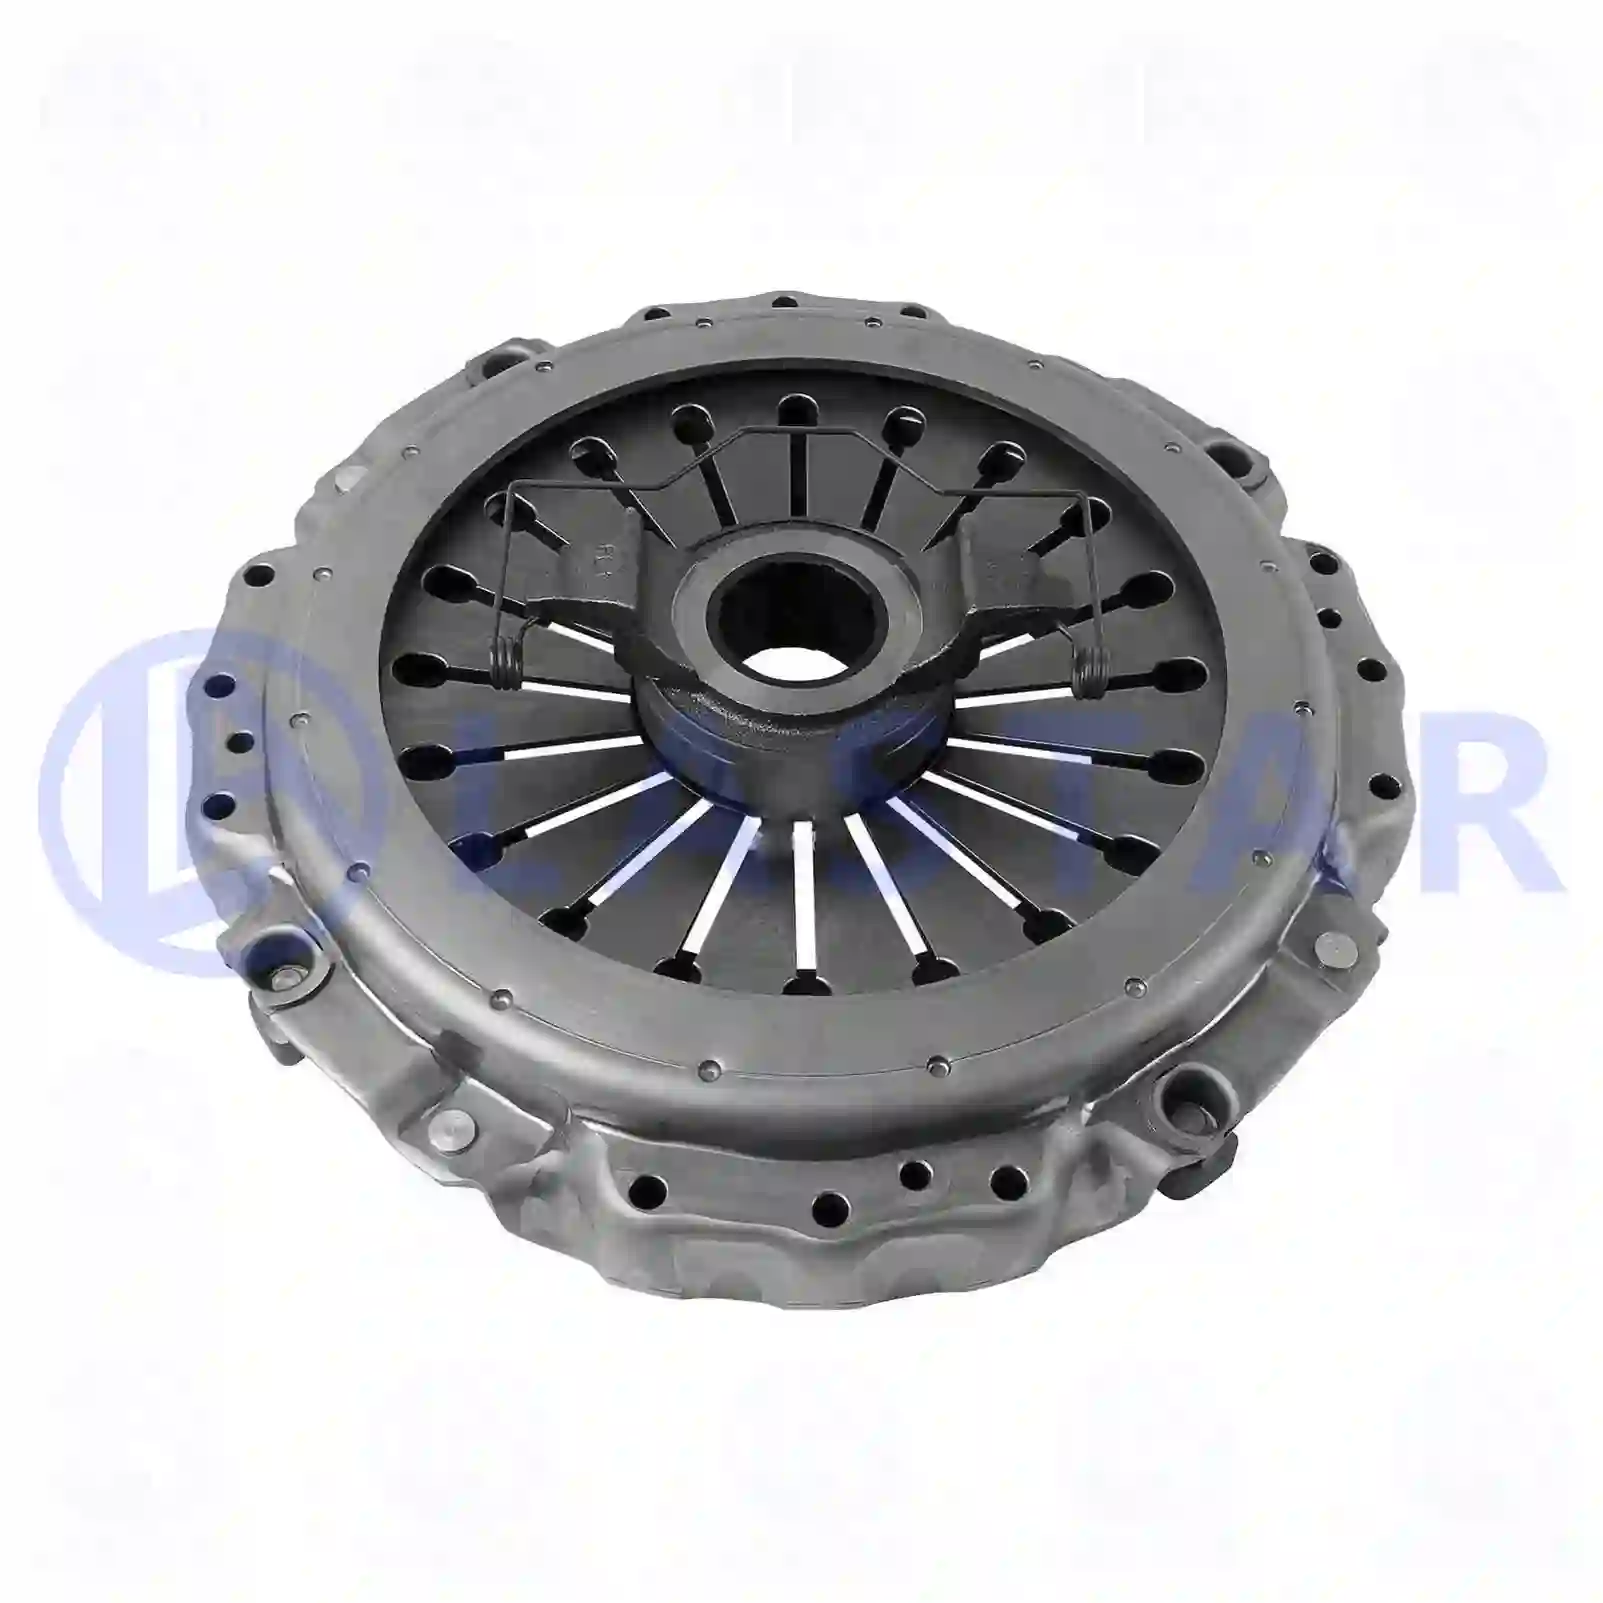  Clutch Kit (Cover & Disc) Clutch cover, with release bearing, la no: 77722263 ,  oem no:1521721, 1669116, 1669827, 1672935, 20569126, 20575561, 3192200, 3192210, 8113463, 8113513, 8113529, 8116463, 8116513, 8119463, 8119513, 8119529, 85000393, 85000523, 85000527, 85006393 Lastar Spare Part | Truck Spare Parts, Auotomotive Spare Parts